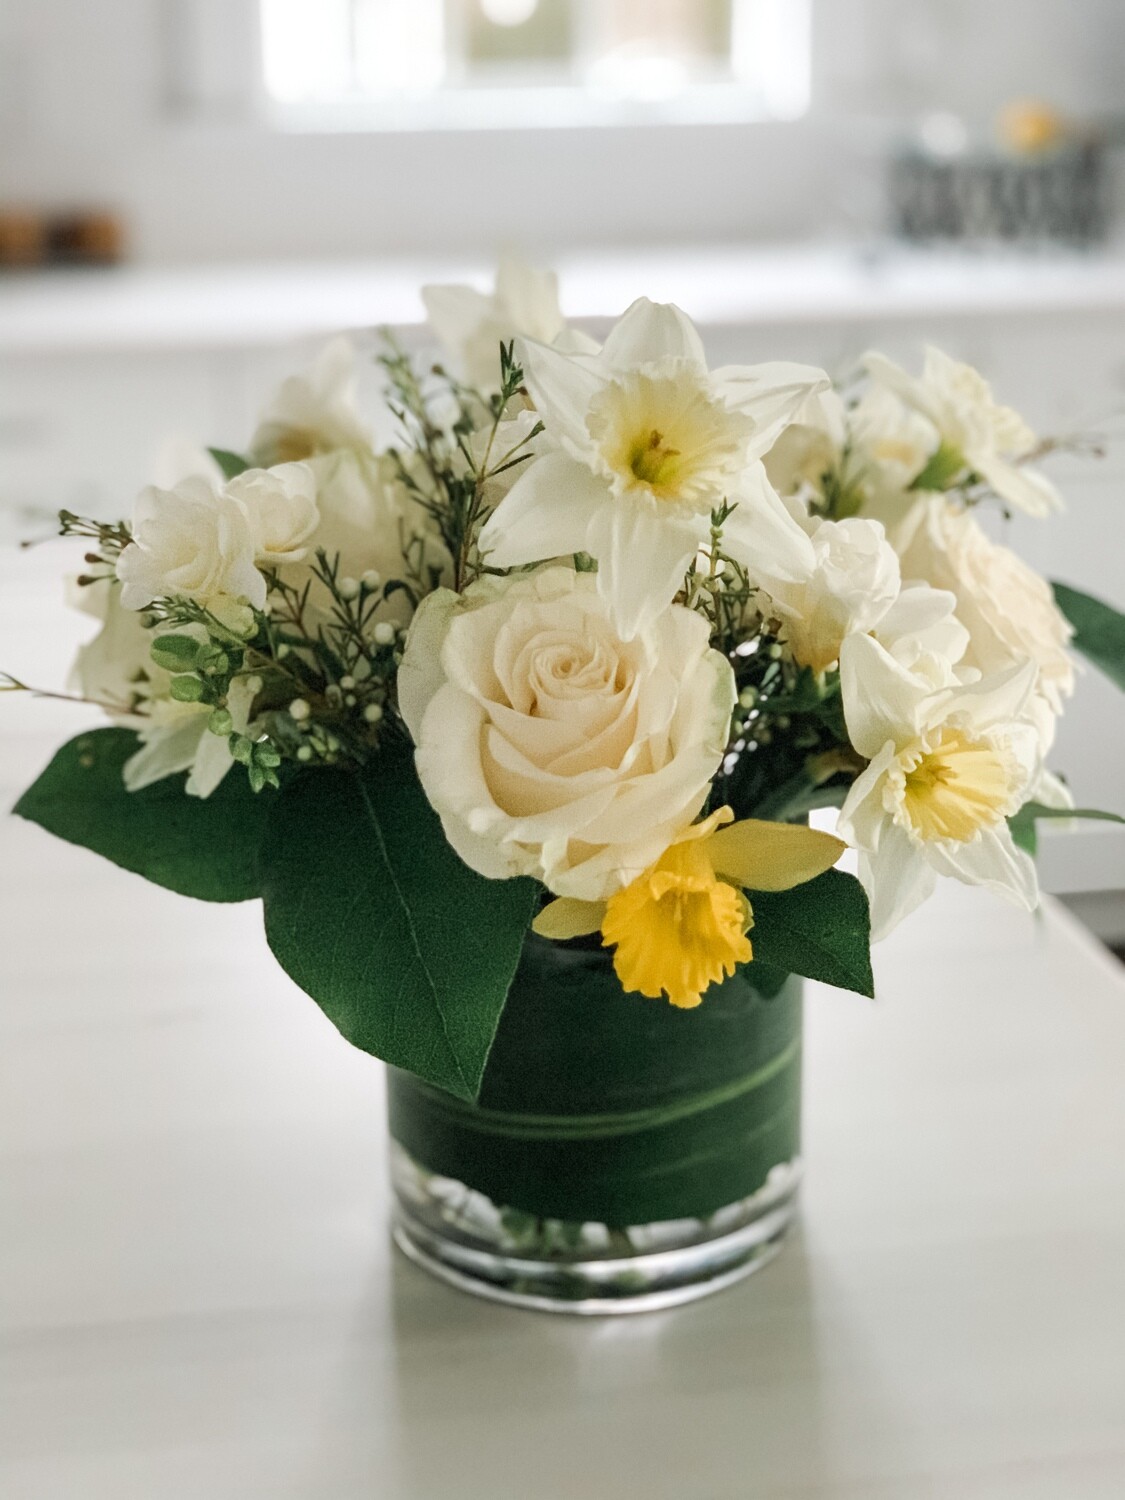 MOTHER'S DAY FLOWERS